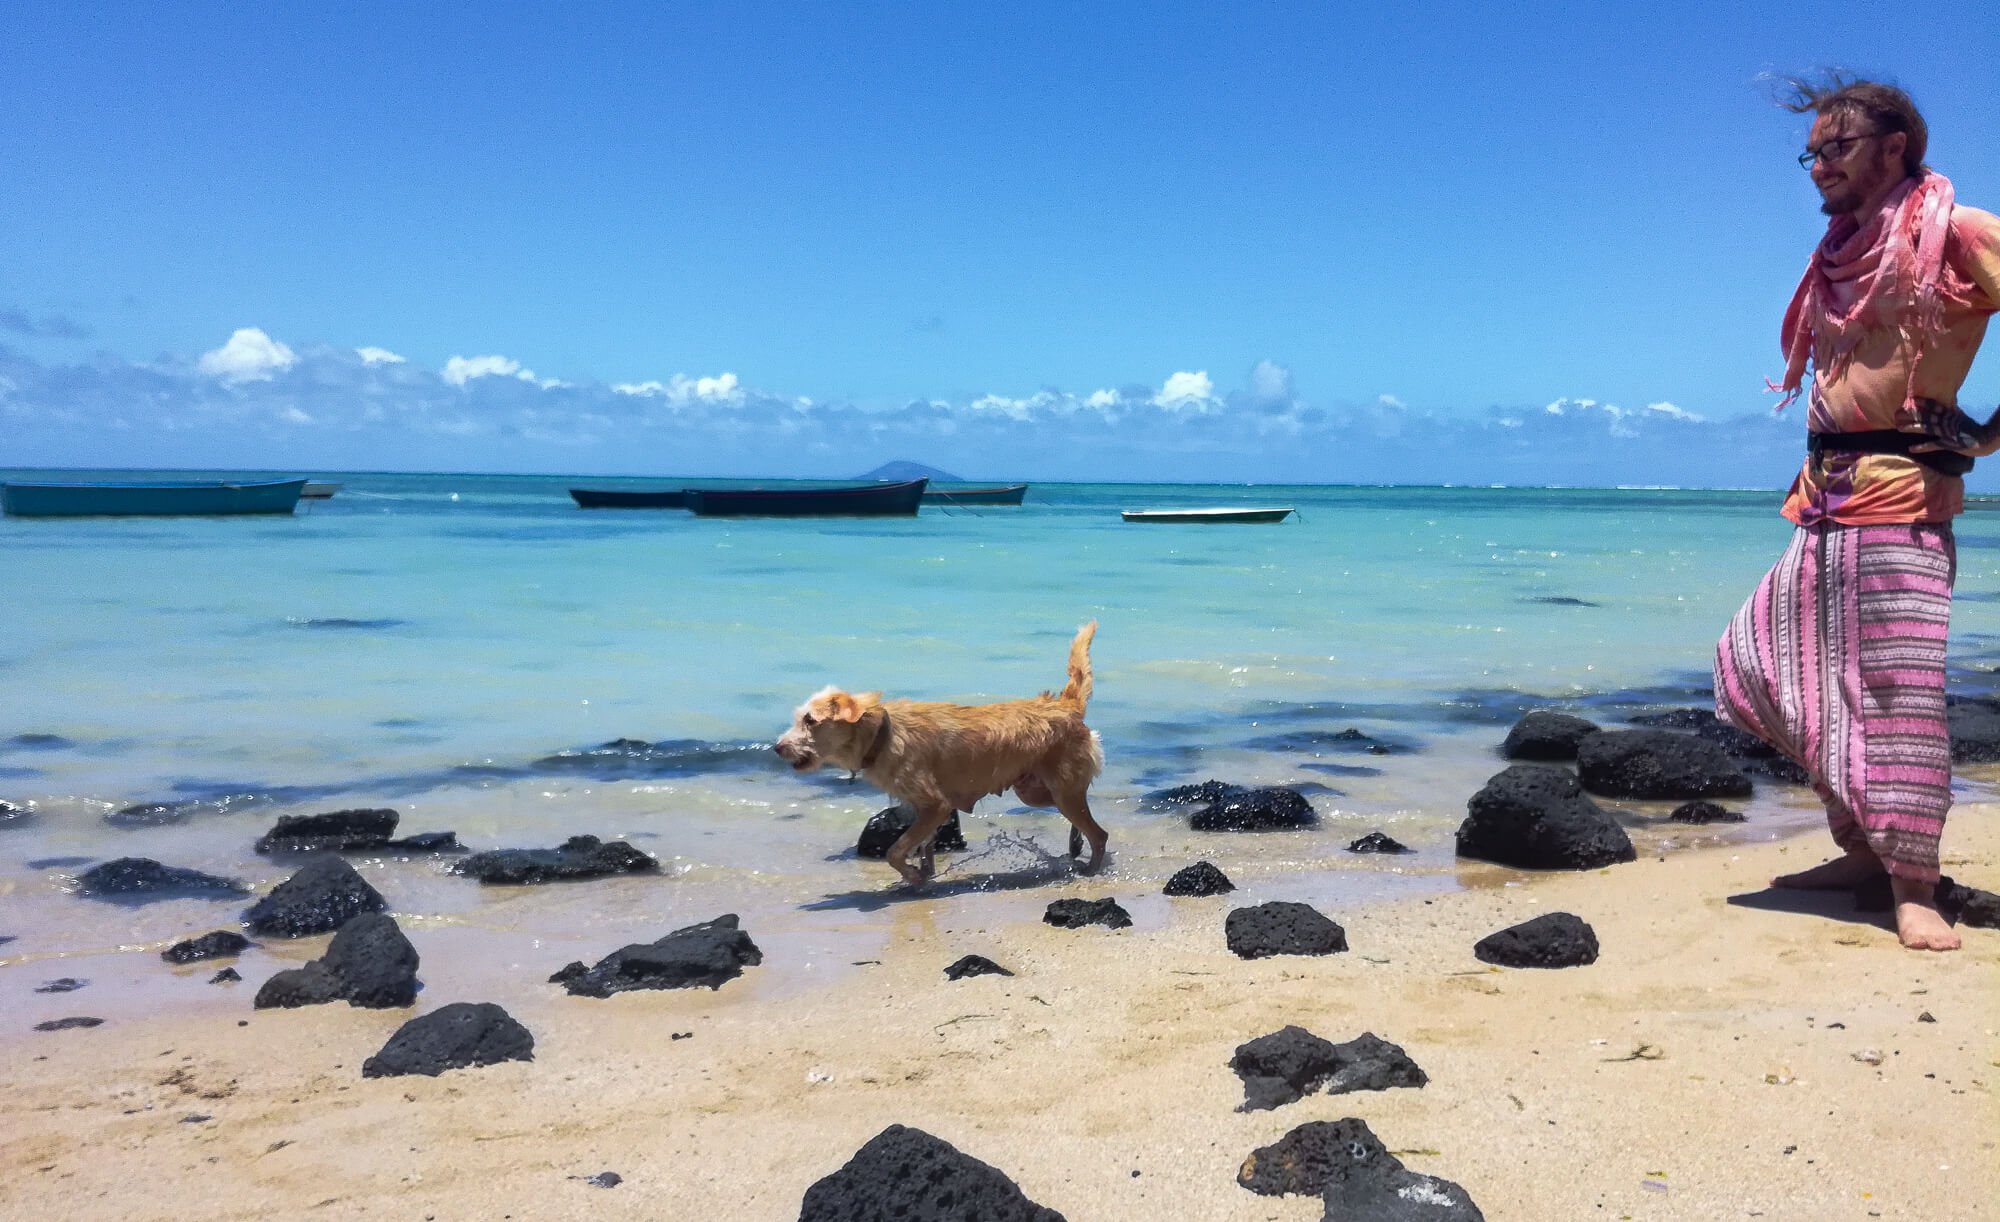 A man and a dog on a beautiful public beach in Mauritius